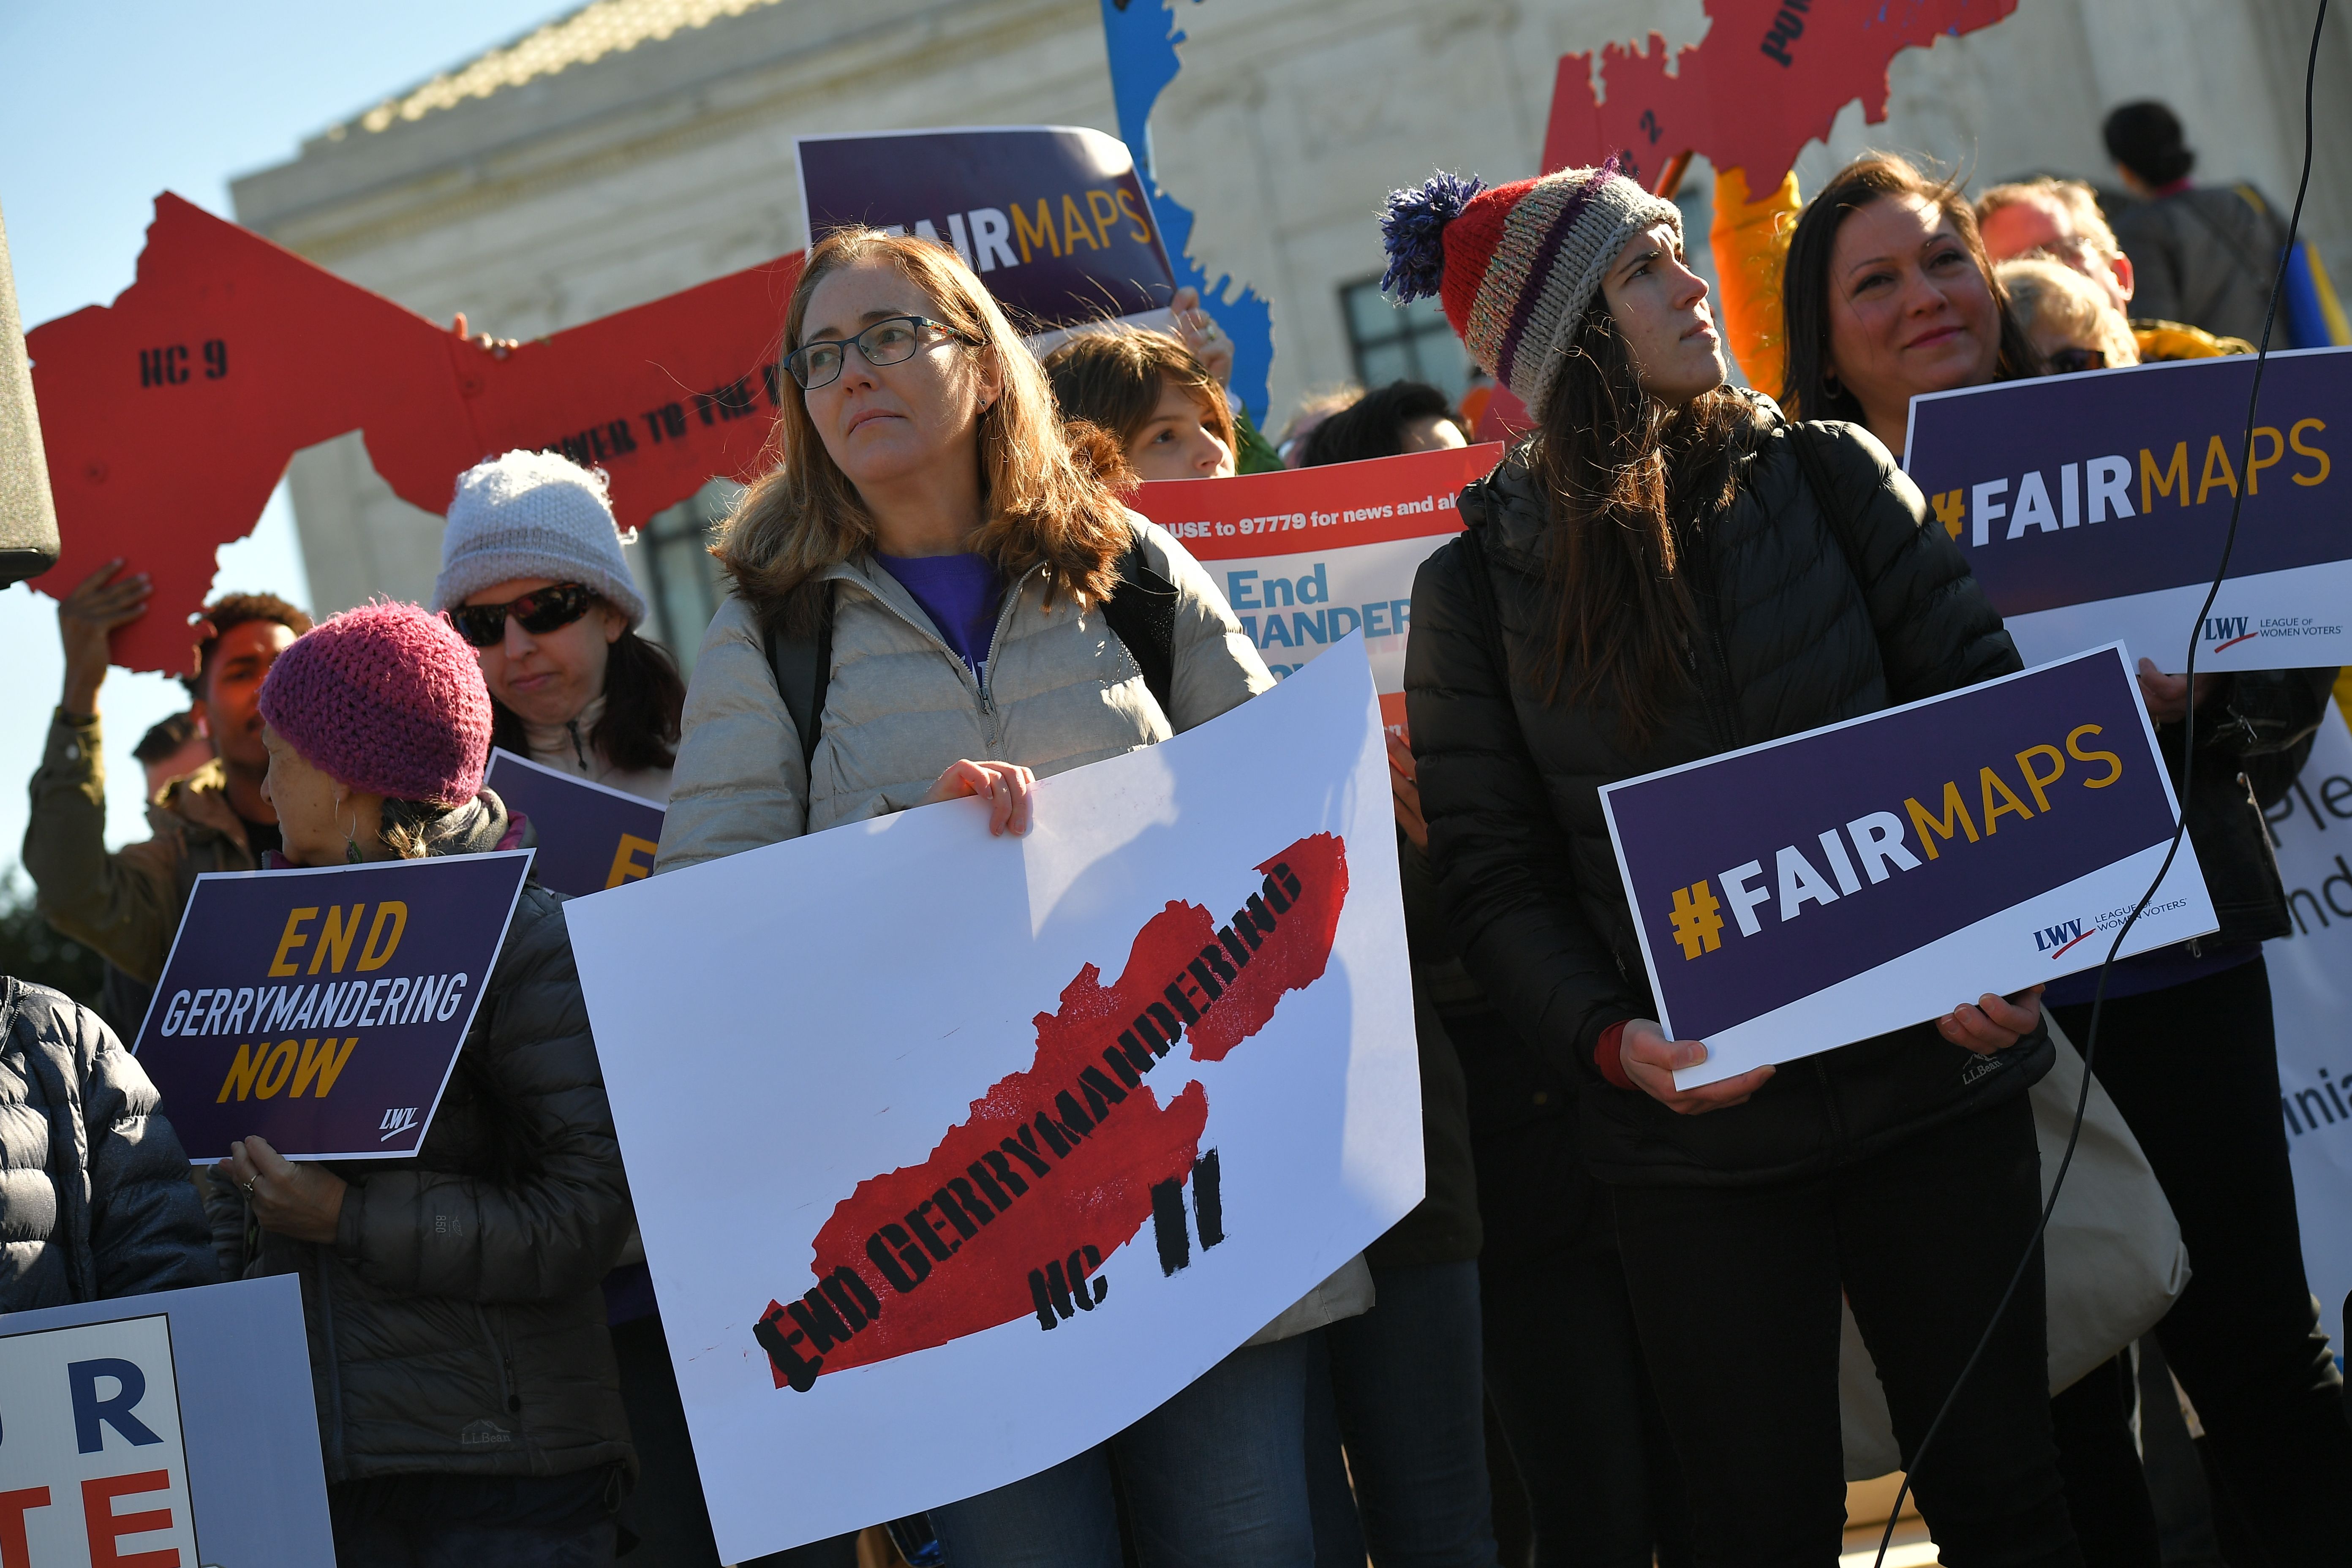 Demonstrators rally in front of the Supreme Court on March 26, 2019. (Mandel Ngan/AFP/Getty Images)